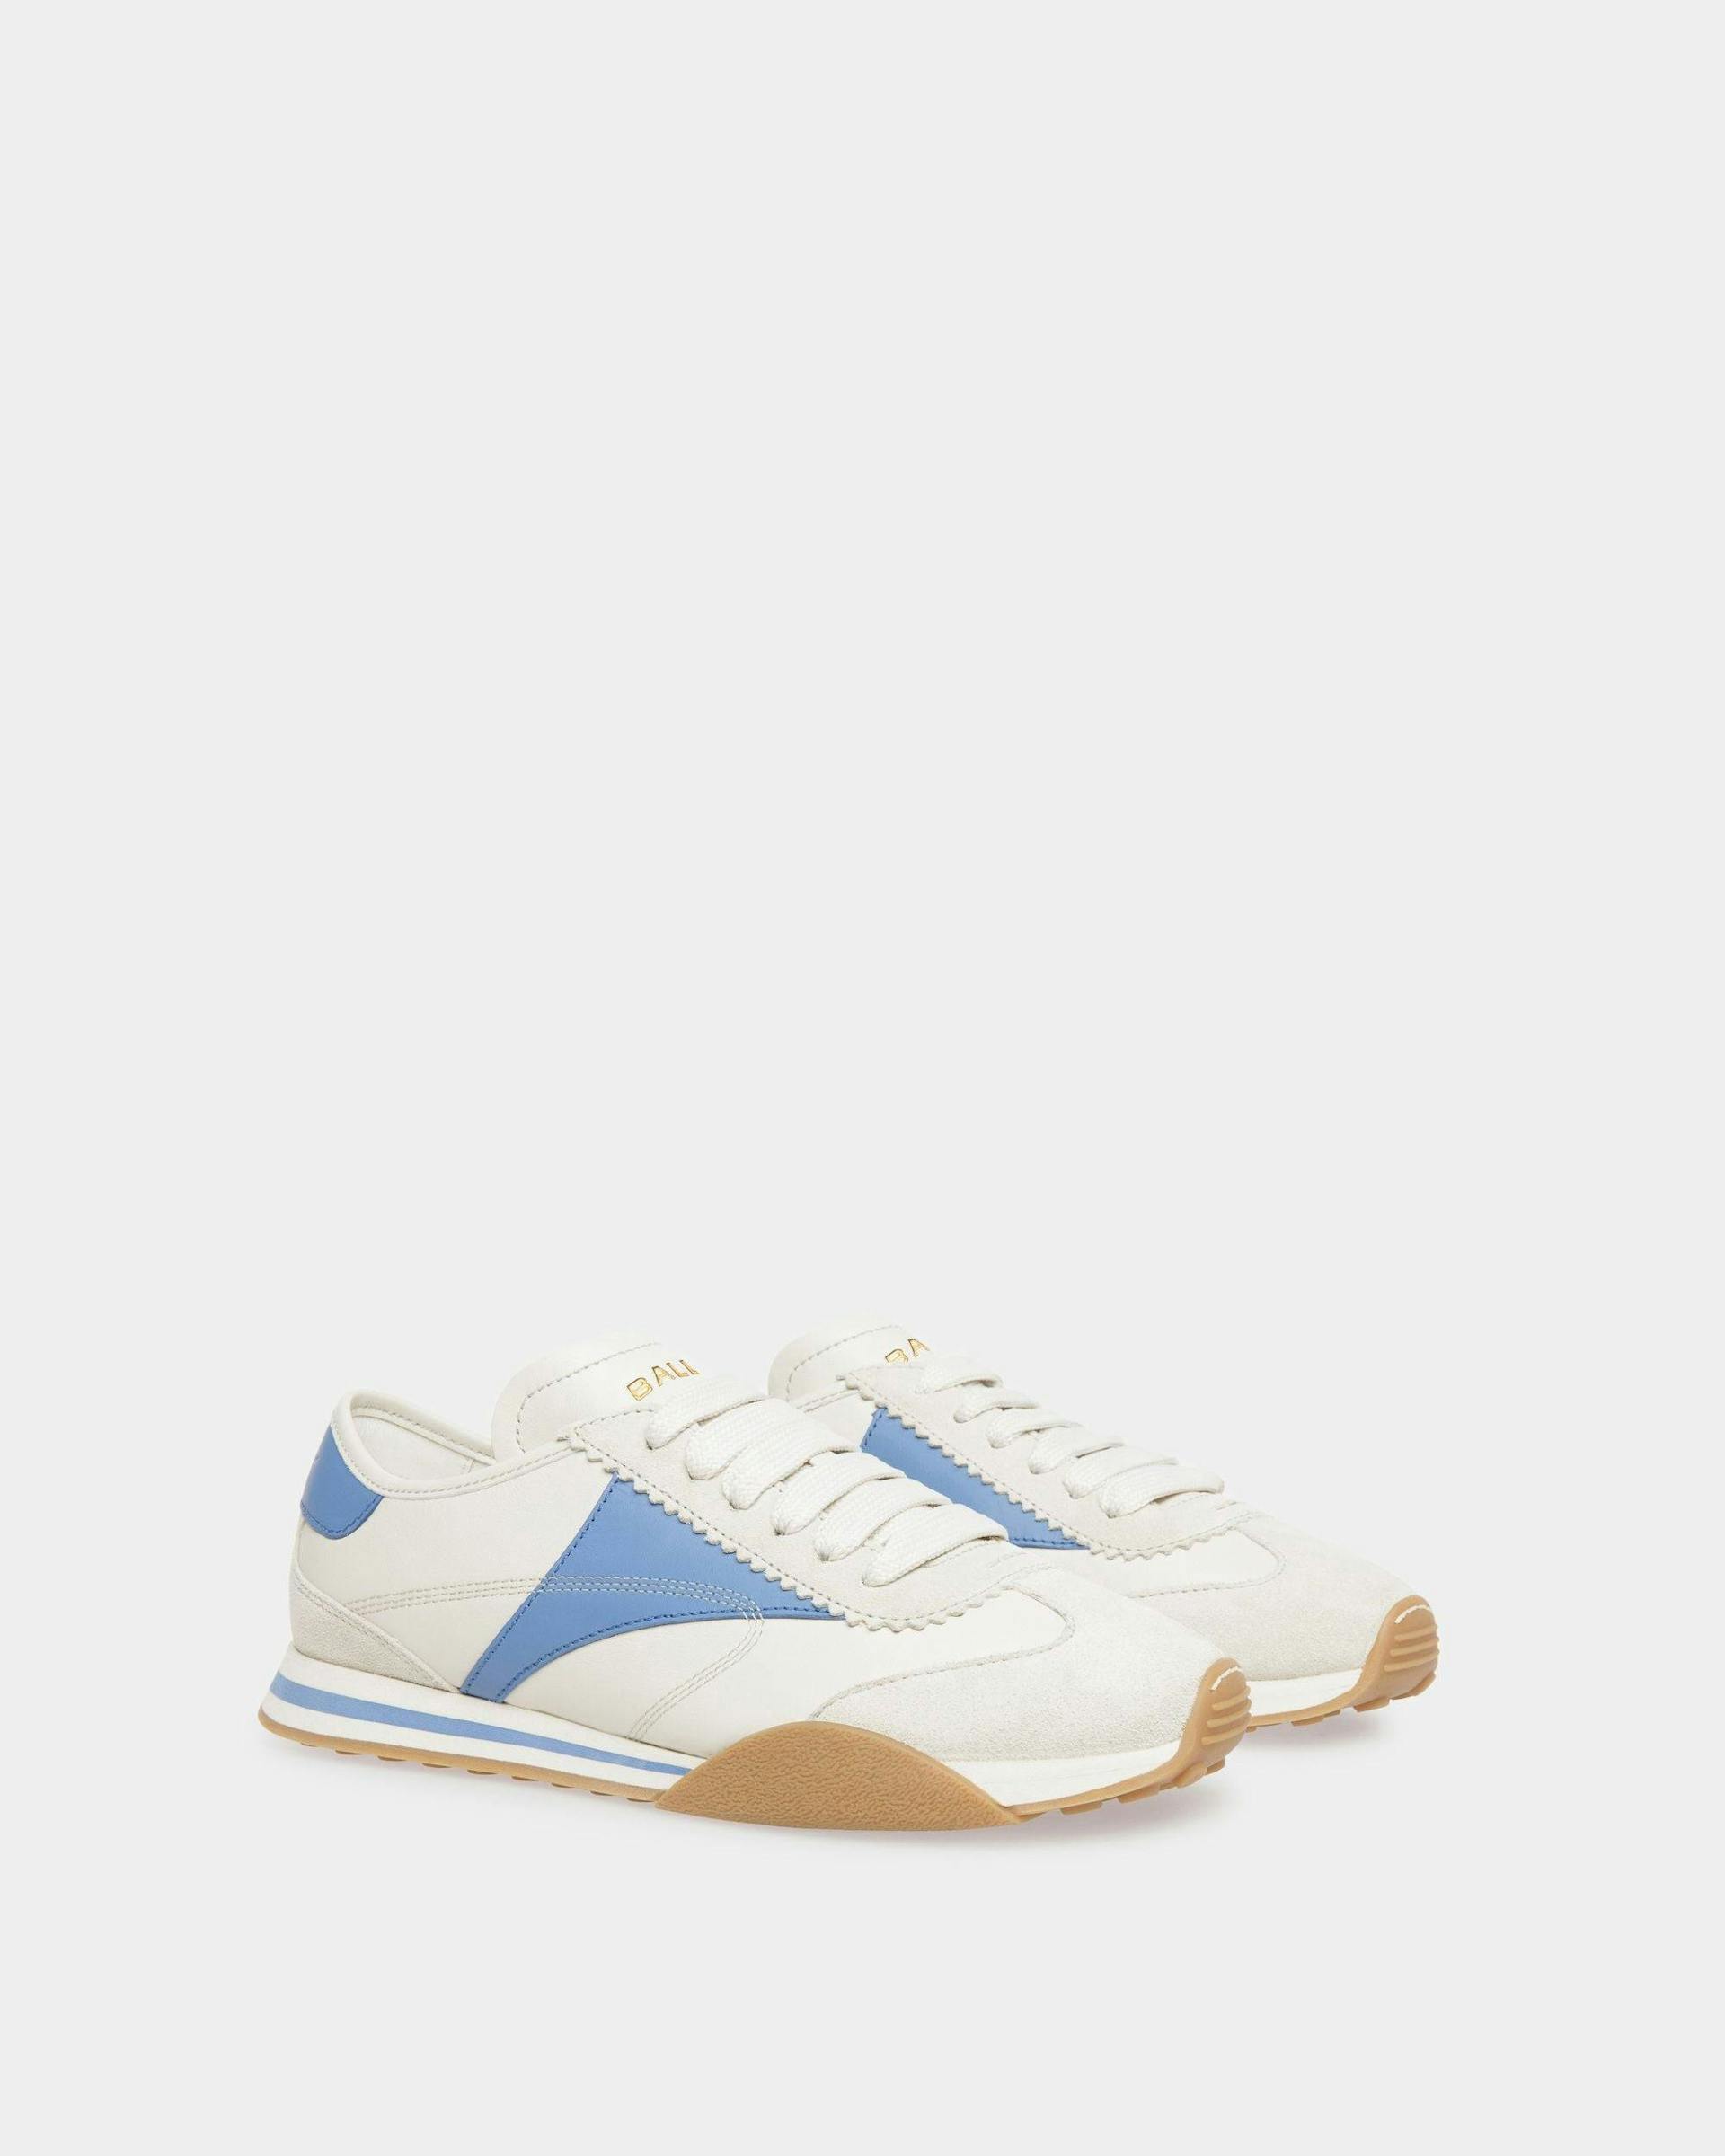 Women's Sussex Sneakers In Dusty White And Blue Leather | Bally | Still Life 3/4 Front